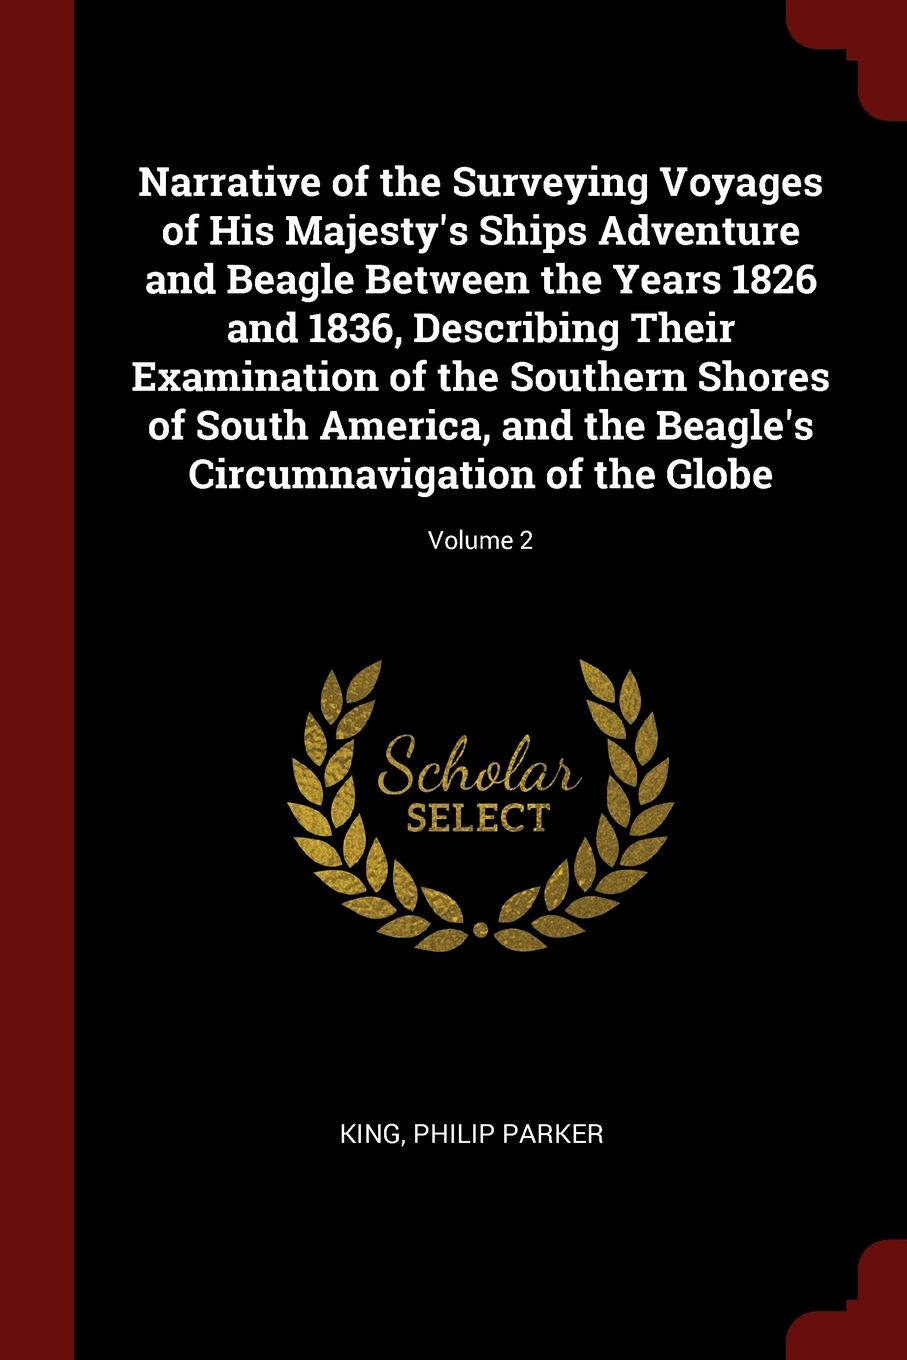 Narrative of the Surveying Voyages of His Majesty.s Ships Adventure and Beagle Between the Years 1826 and 1836, Describing Their Examination of the Southern Shores of South America, and the Beagle.s Circumnavigation of the Globe; Volume 2